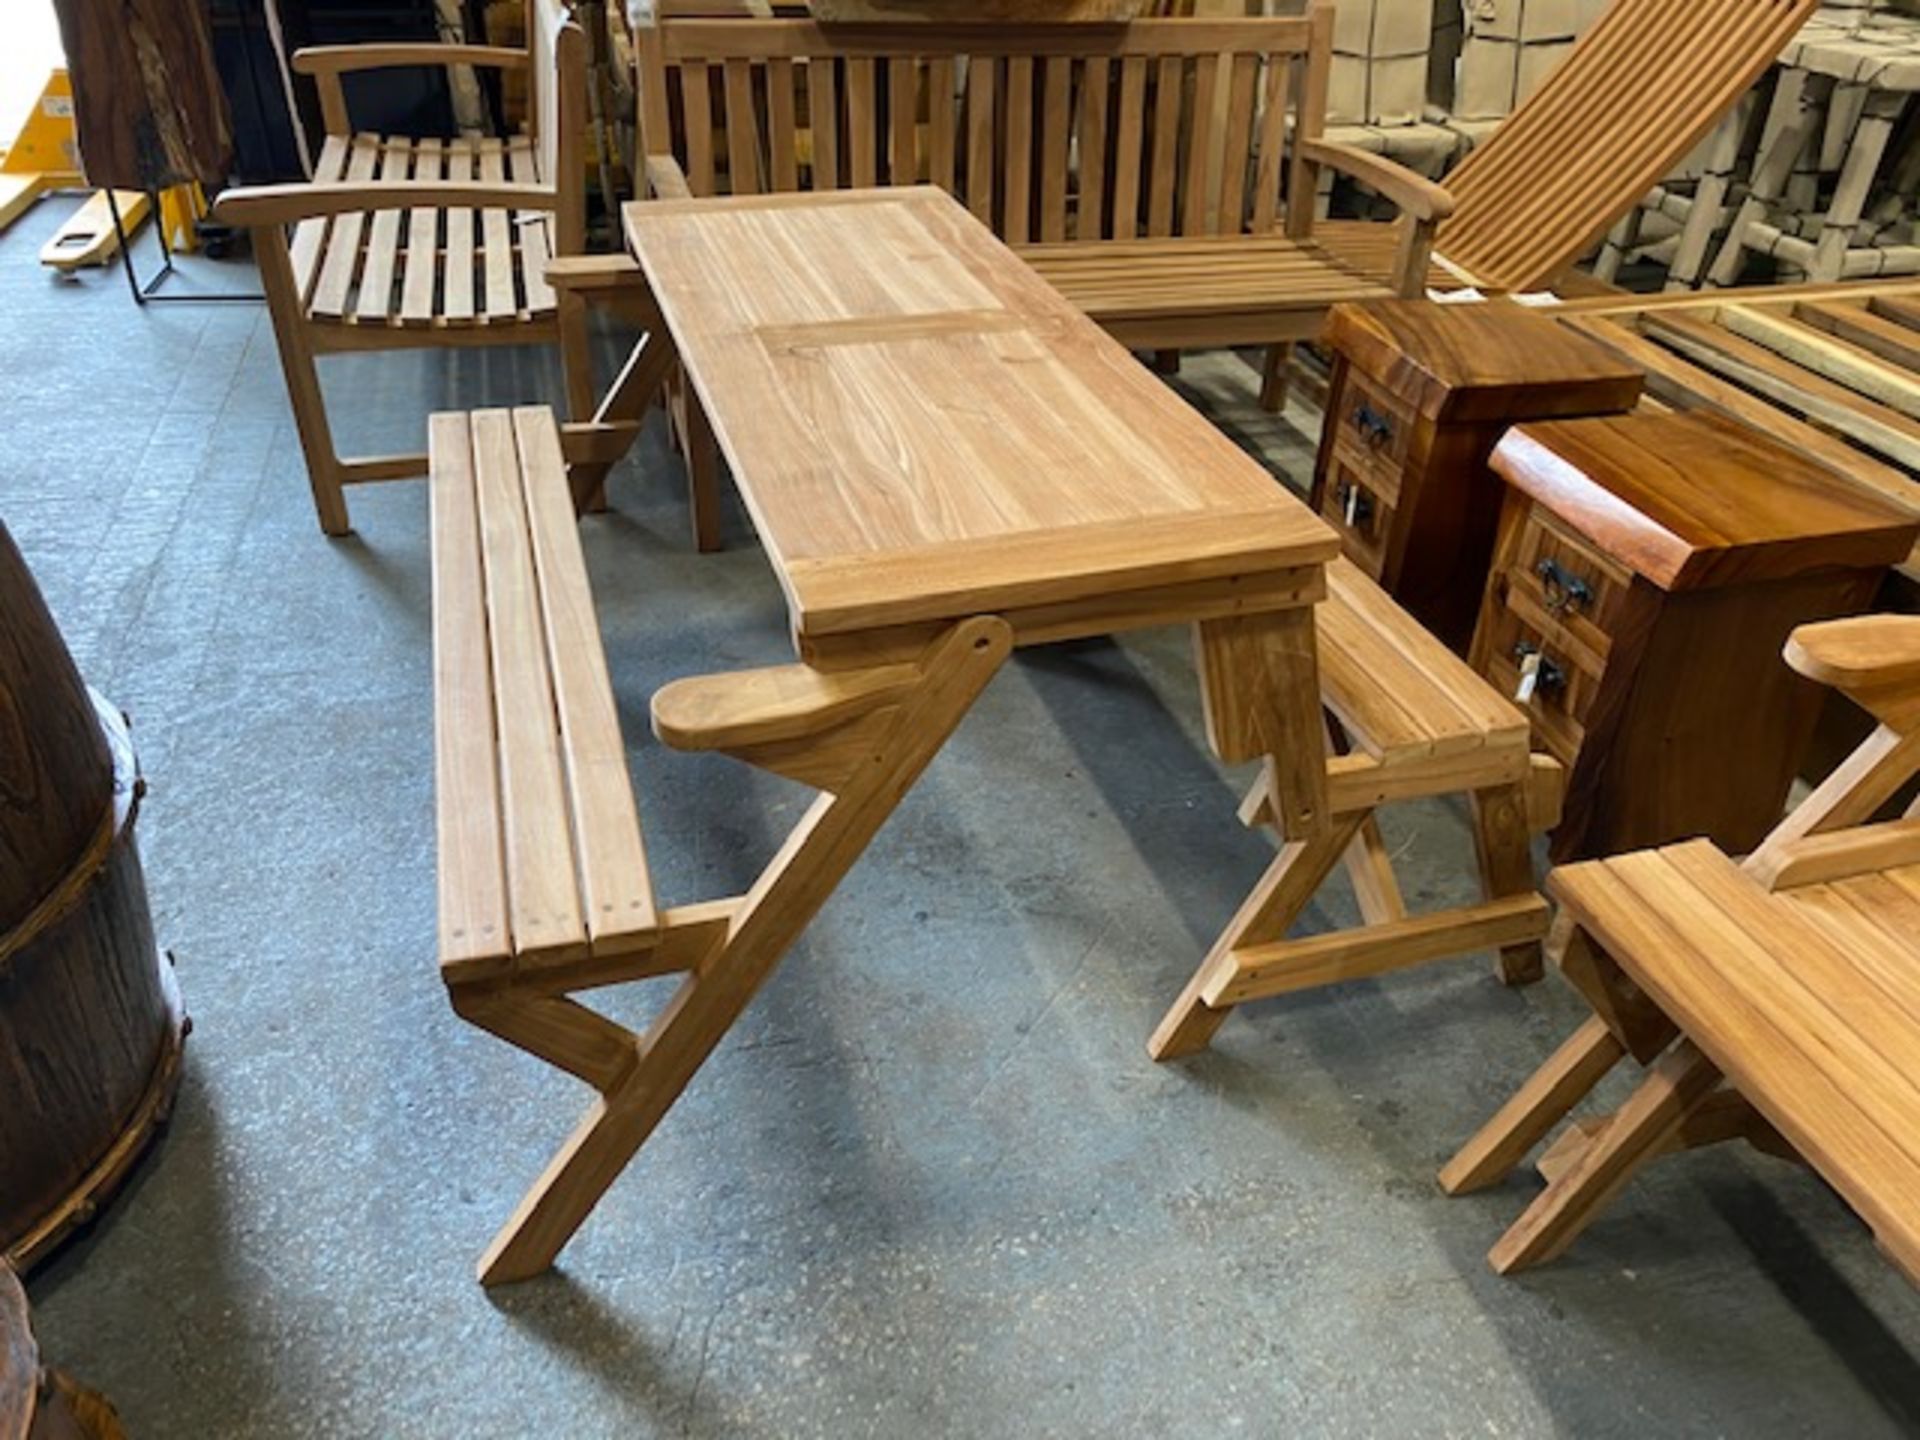 BRAND NEW SOLID TEAK WOODEN PICNIC BENCH 135 X 58 X 86cm RRP £500 - Image 3 of 3